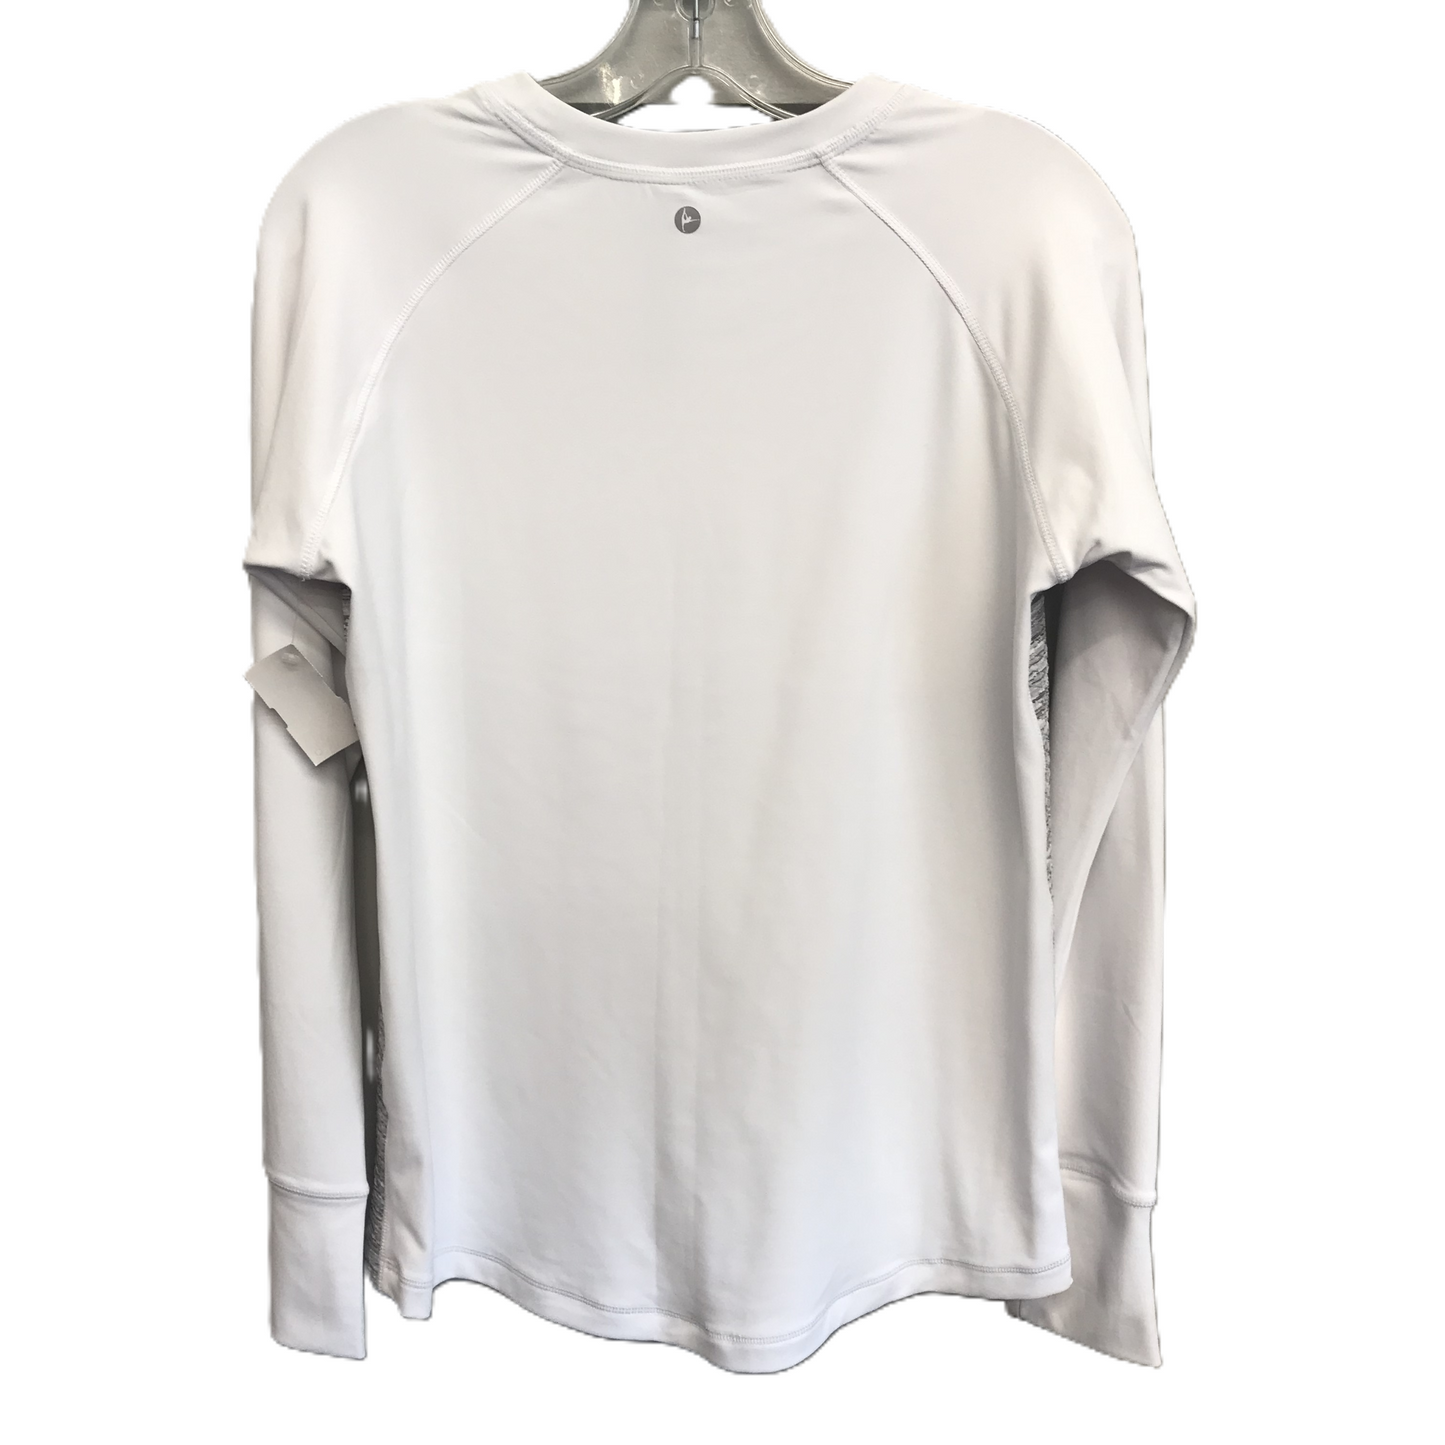 White Athletic Top Long Sleeve Crewneck By 90 Degrees By Reflex, Size: M